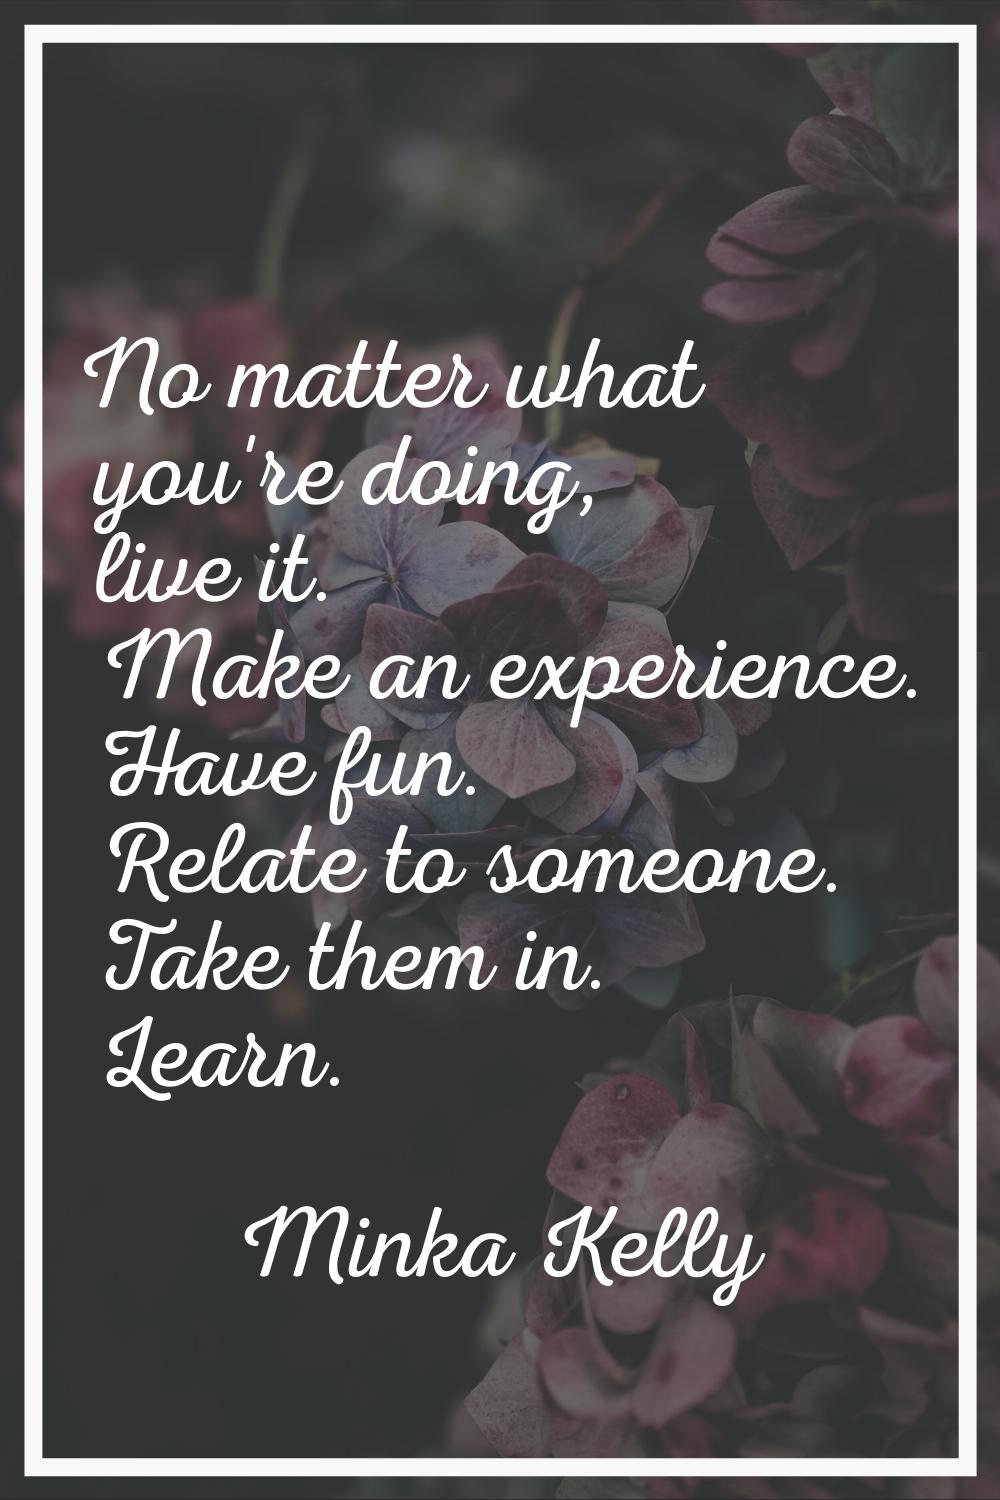 No matter what you're doing, live it. Make an experience. Have fun. Relate to someone. Take them in